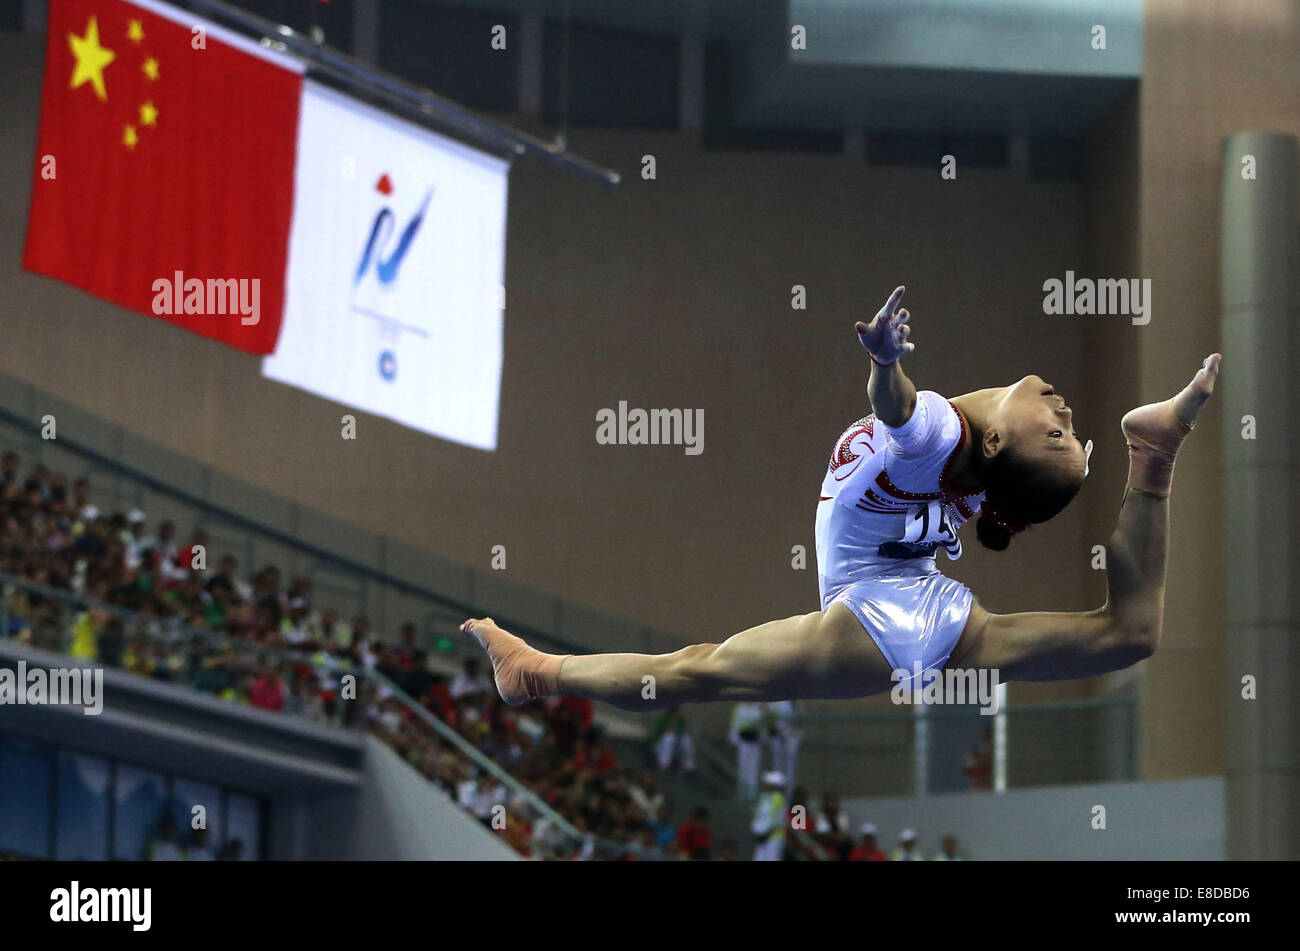 Nanning, China's Guangxi Zhuang Autonomous Region. 6th Oct, 2014. Chinese gymnast Yao Jinnan performs in the floor exercise during the women's qualifying round of the 45th Gymnastics World Championships in Nanning, capital of south China's Guangxi Zhuang Autonomous Region, Oct. 6, 2014. The 45th FIG Artistic Gymnastics World Championships lasts from Oct. 3 to 12 in Nanning. Credit:  Ma Zhenyu/Xinhua/Alamy Live News Stock Photo